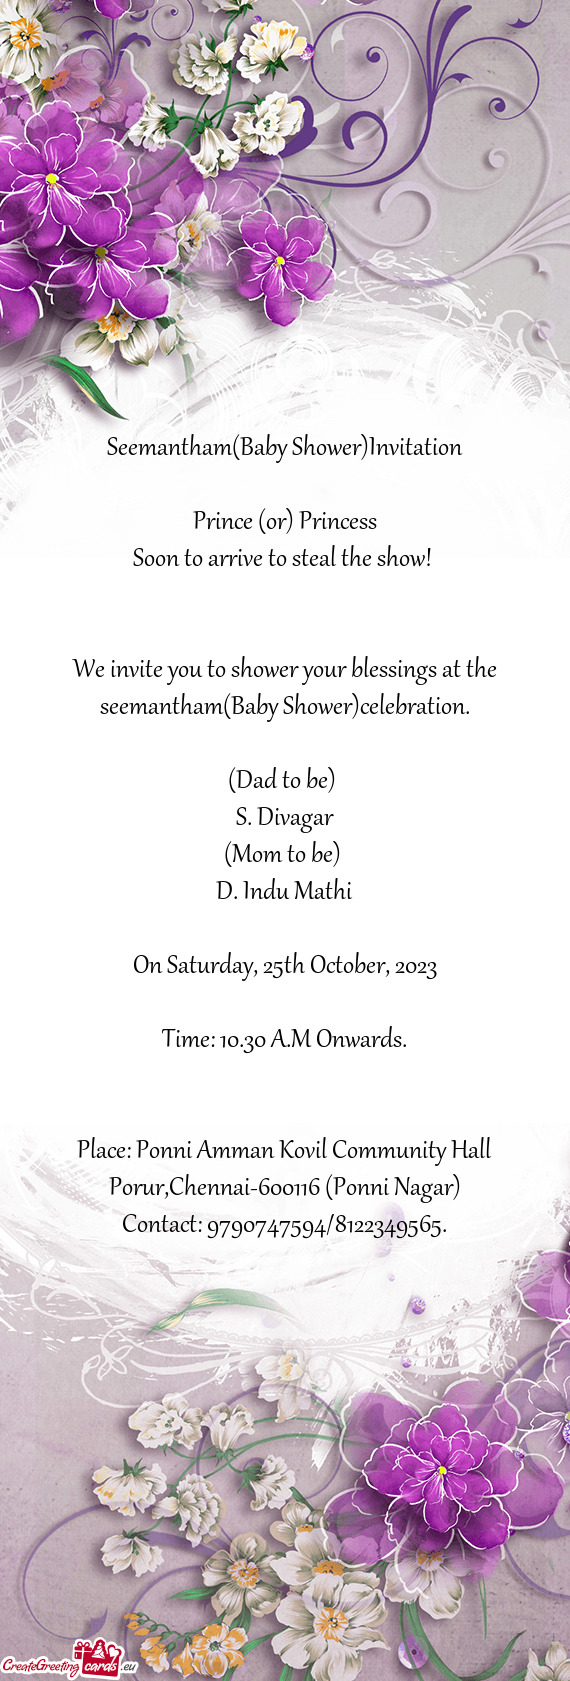 We invite you to shower your blessings at the seemantham(Baby Shower)celebration